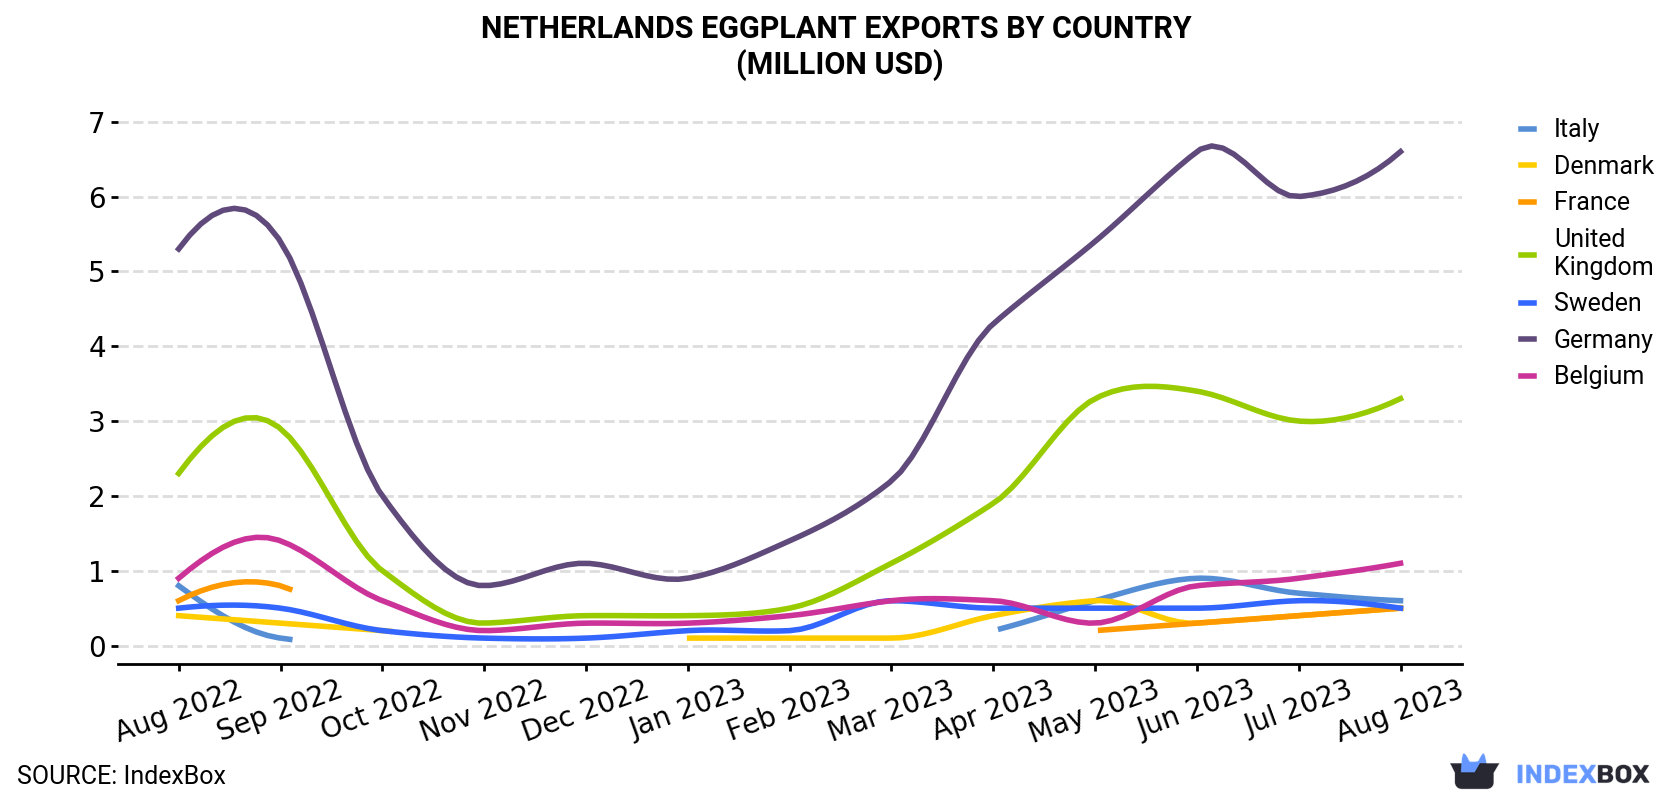 Netherlands Eggplant Exports By Country (Million USD)